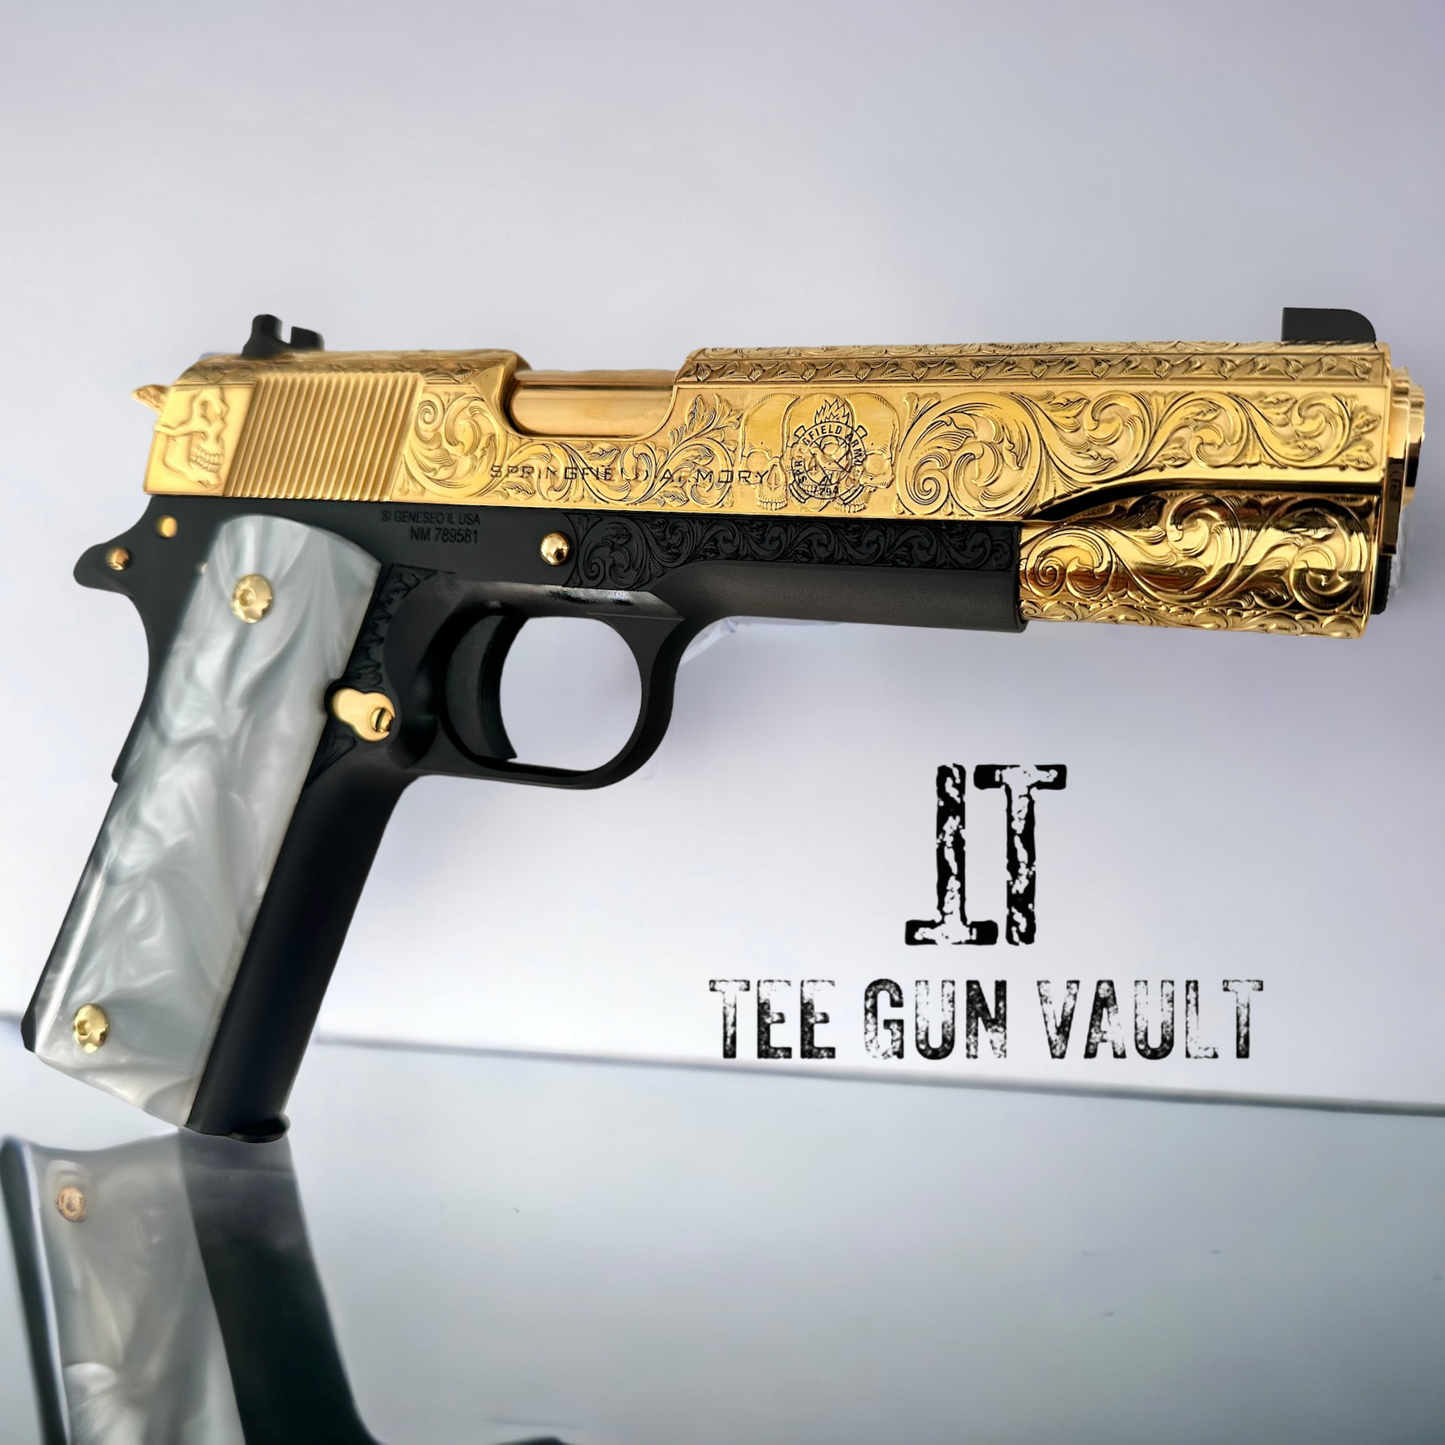 SPRINGFIELD ARMORY 1911 MIL SPEC 45ACP 24k GOLD PLATED AND FULLY ENGRAVED